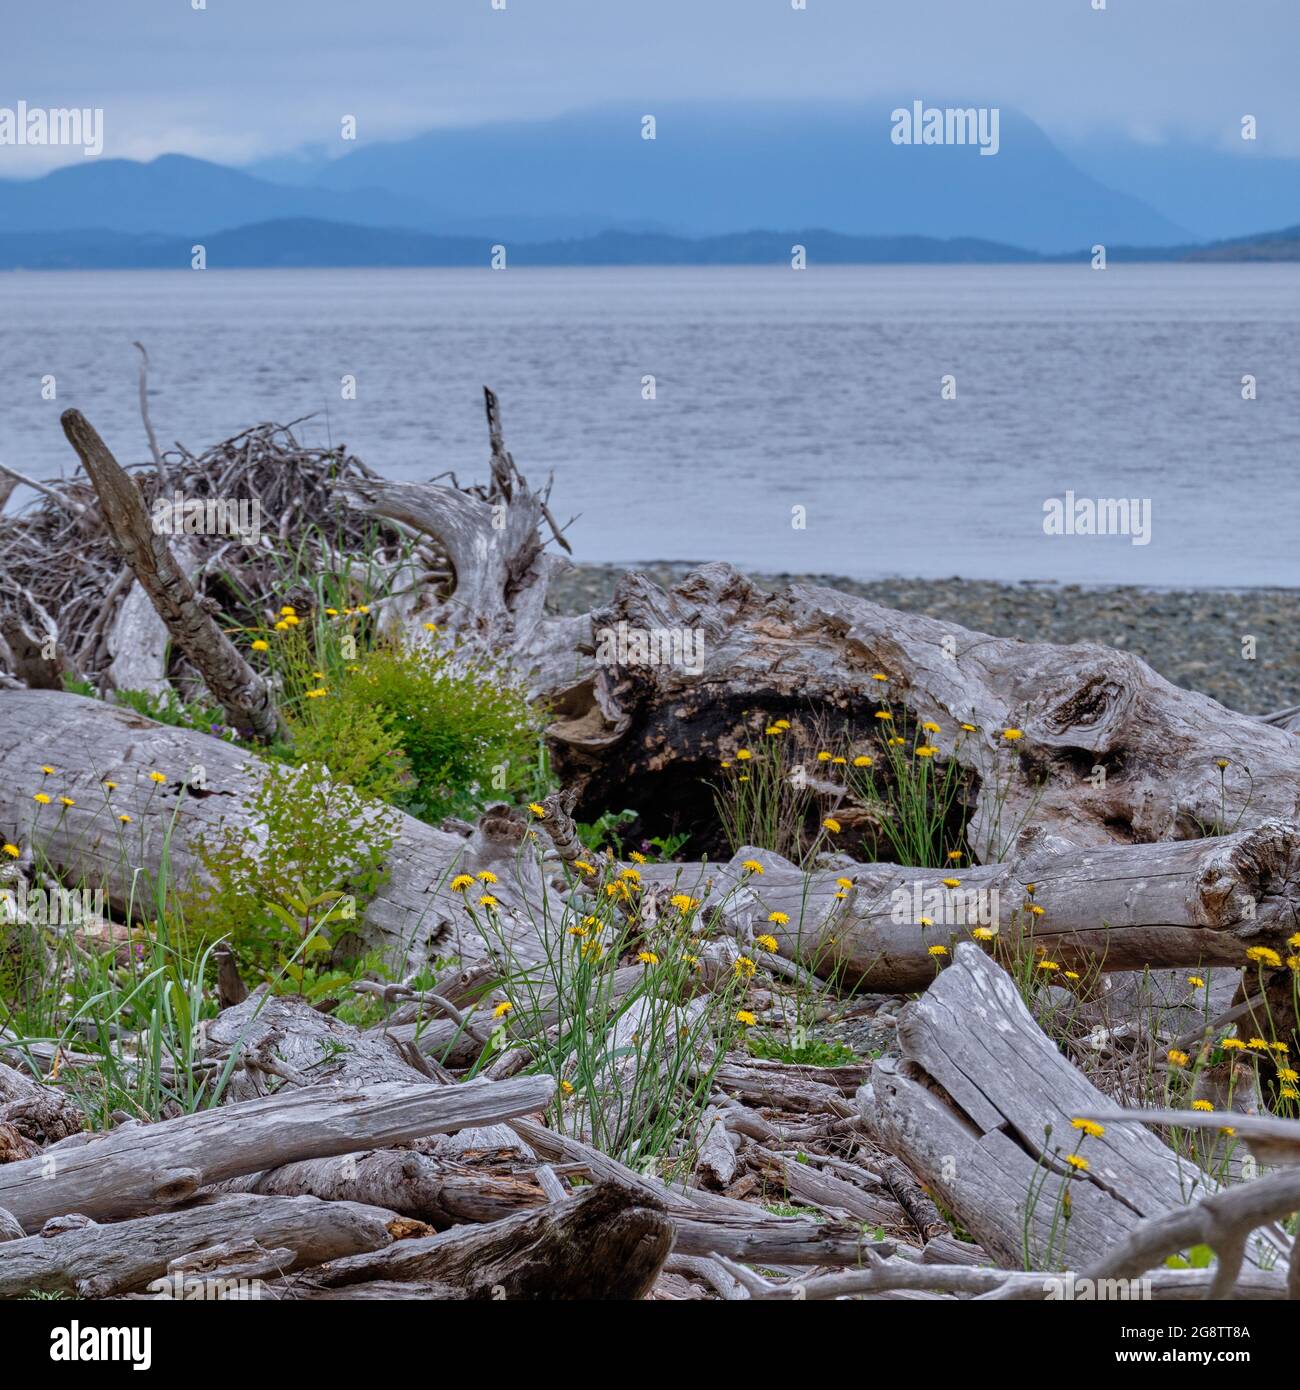 Yellow flower heads of Dandelions grow among many downed trees and driftwood on the beach of Oyster River Nature Park, Campbell River, BC. Stock Photo